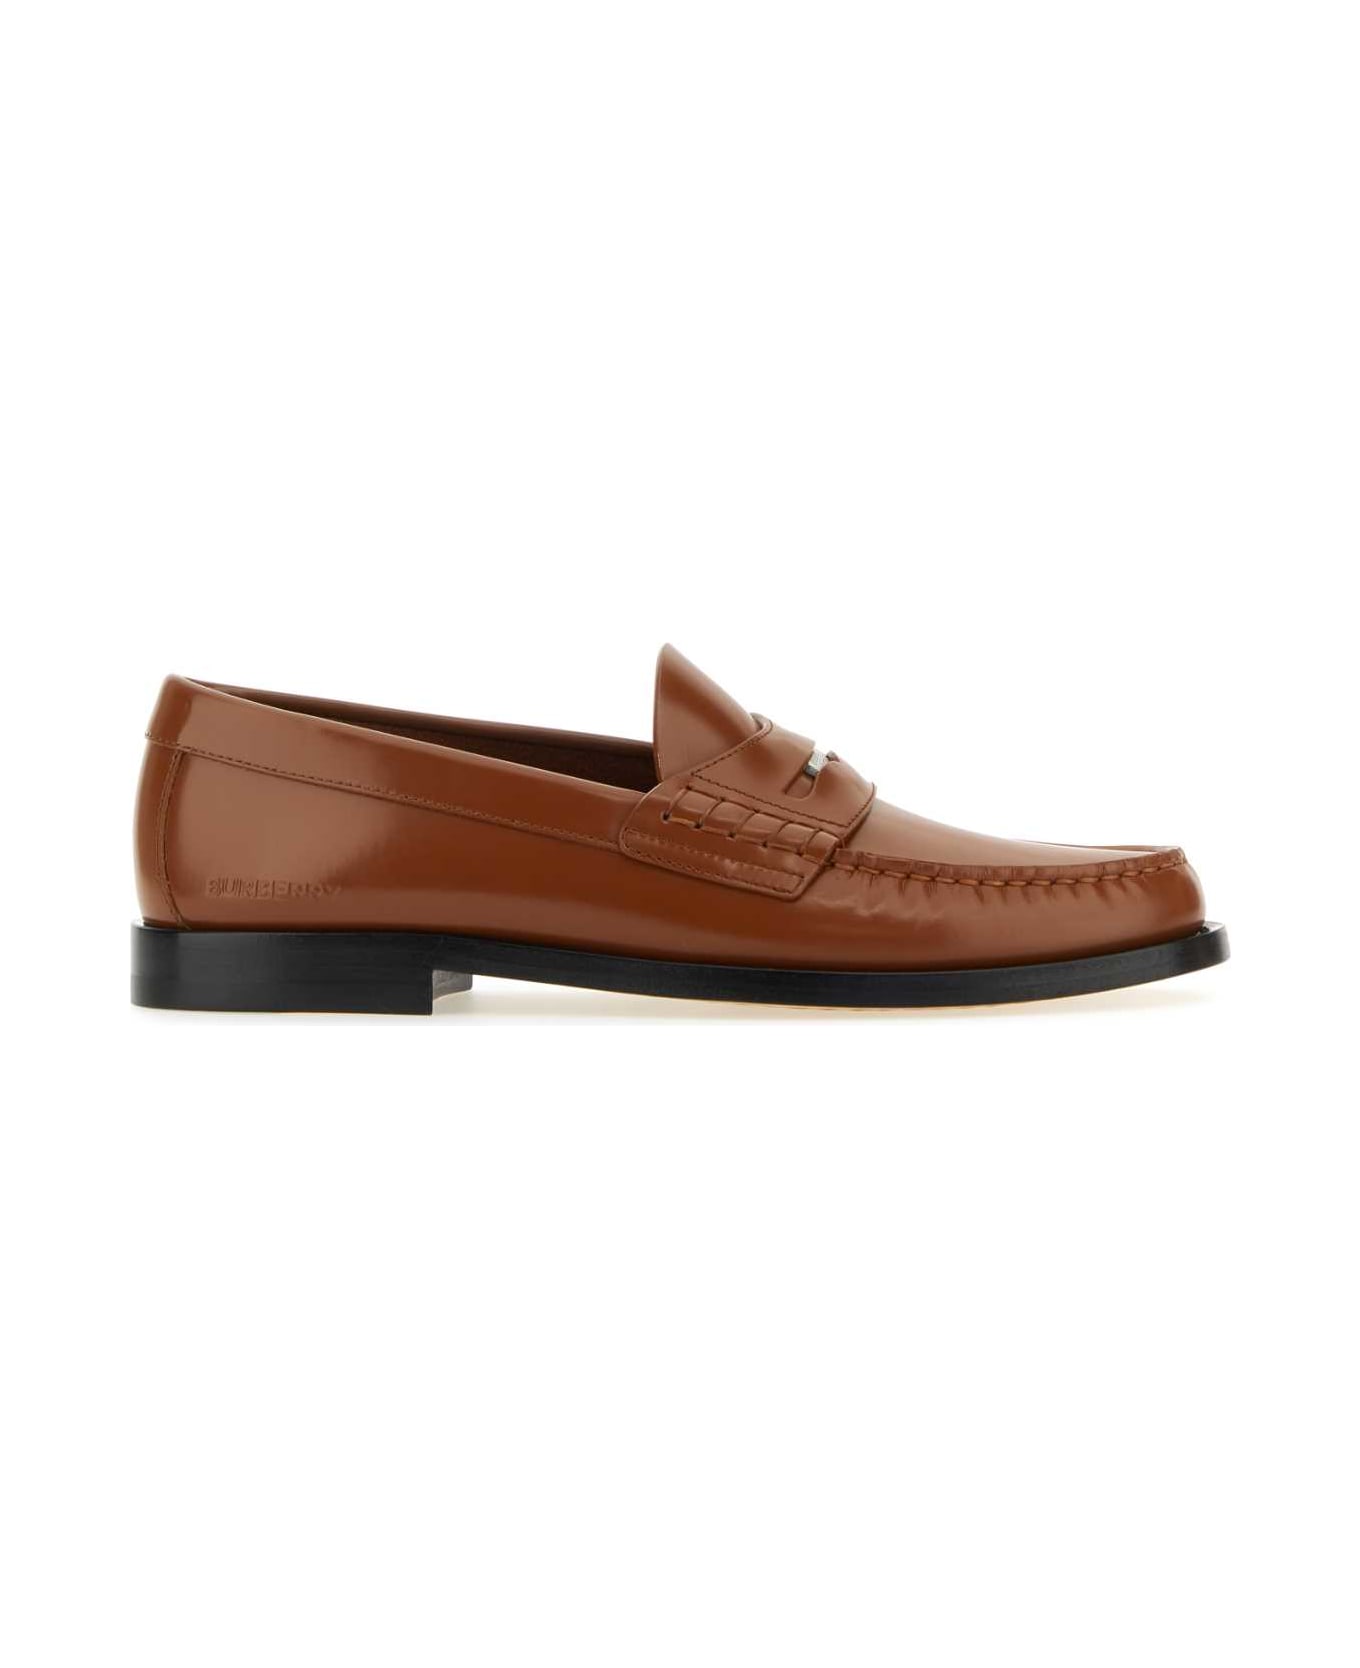 Burberry Brown Leather Loafers - WARMOAKBROWN